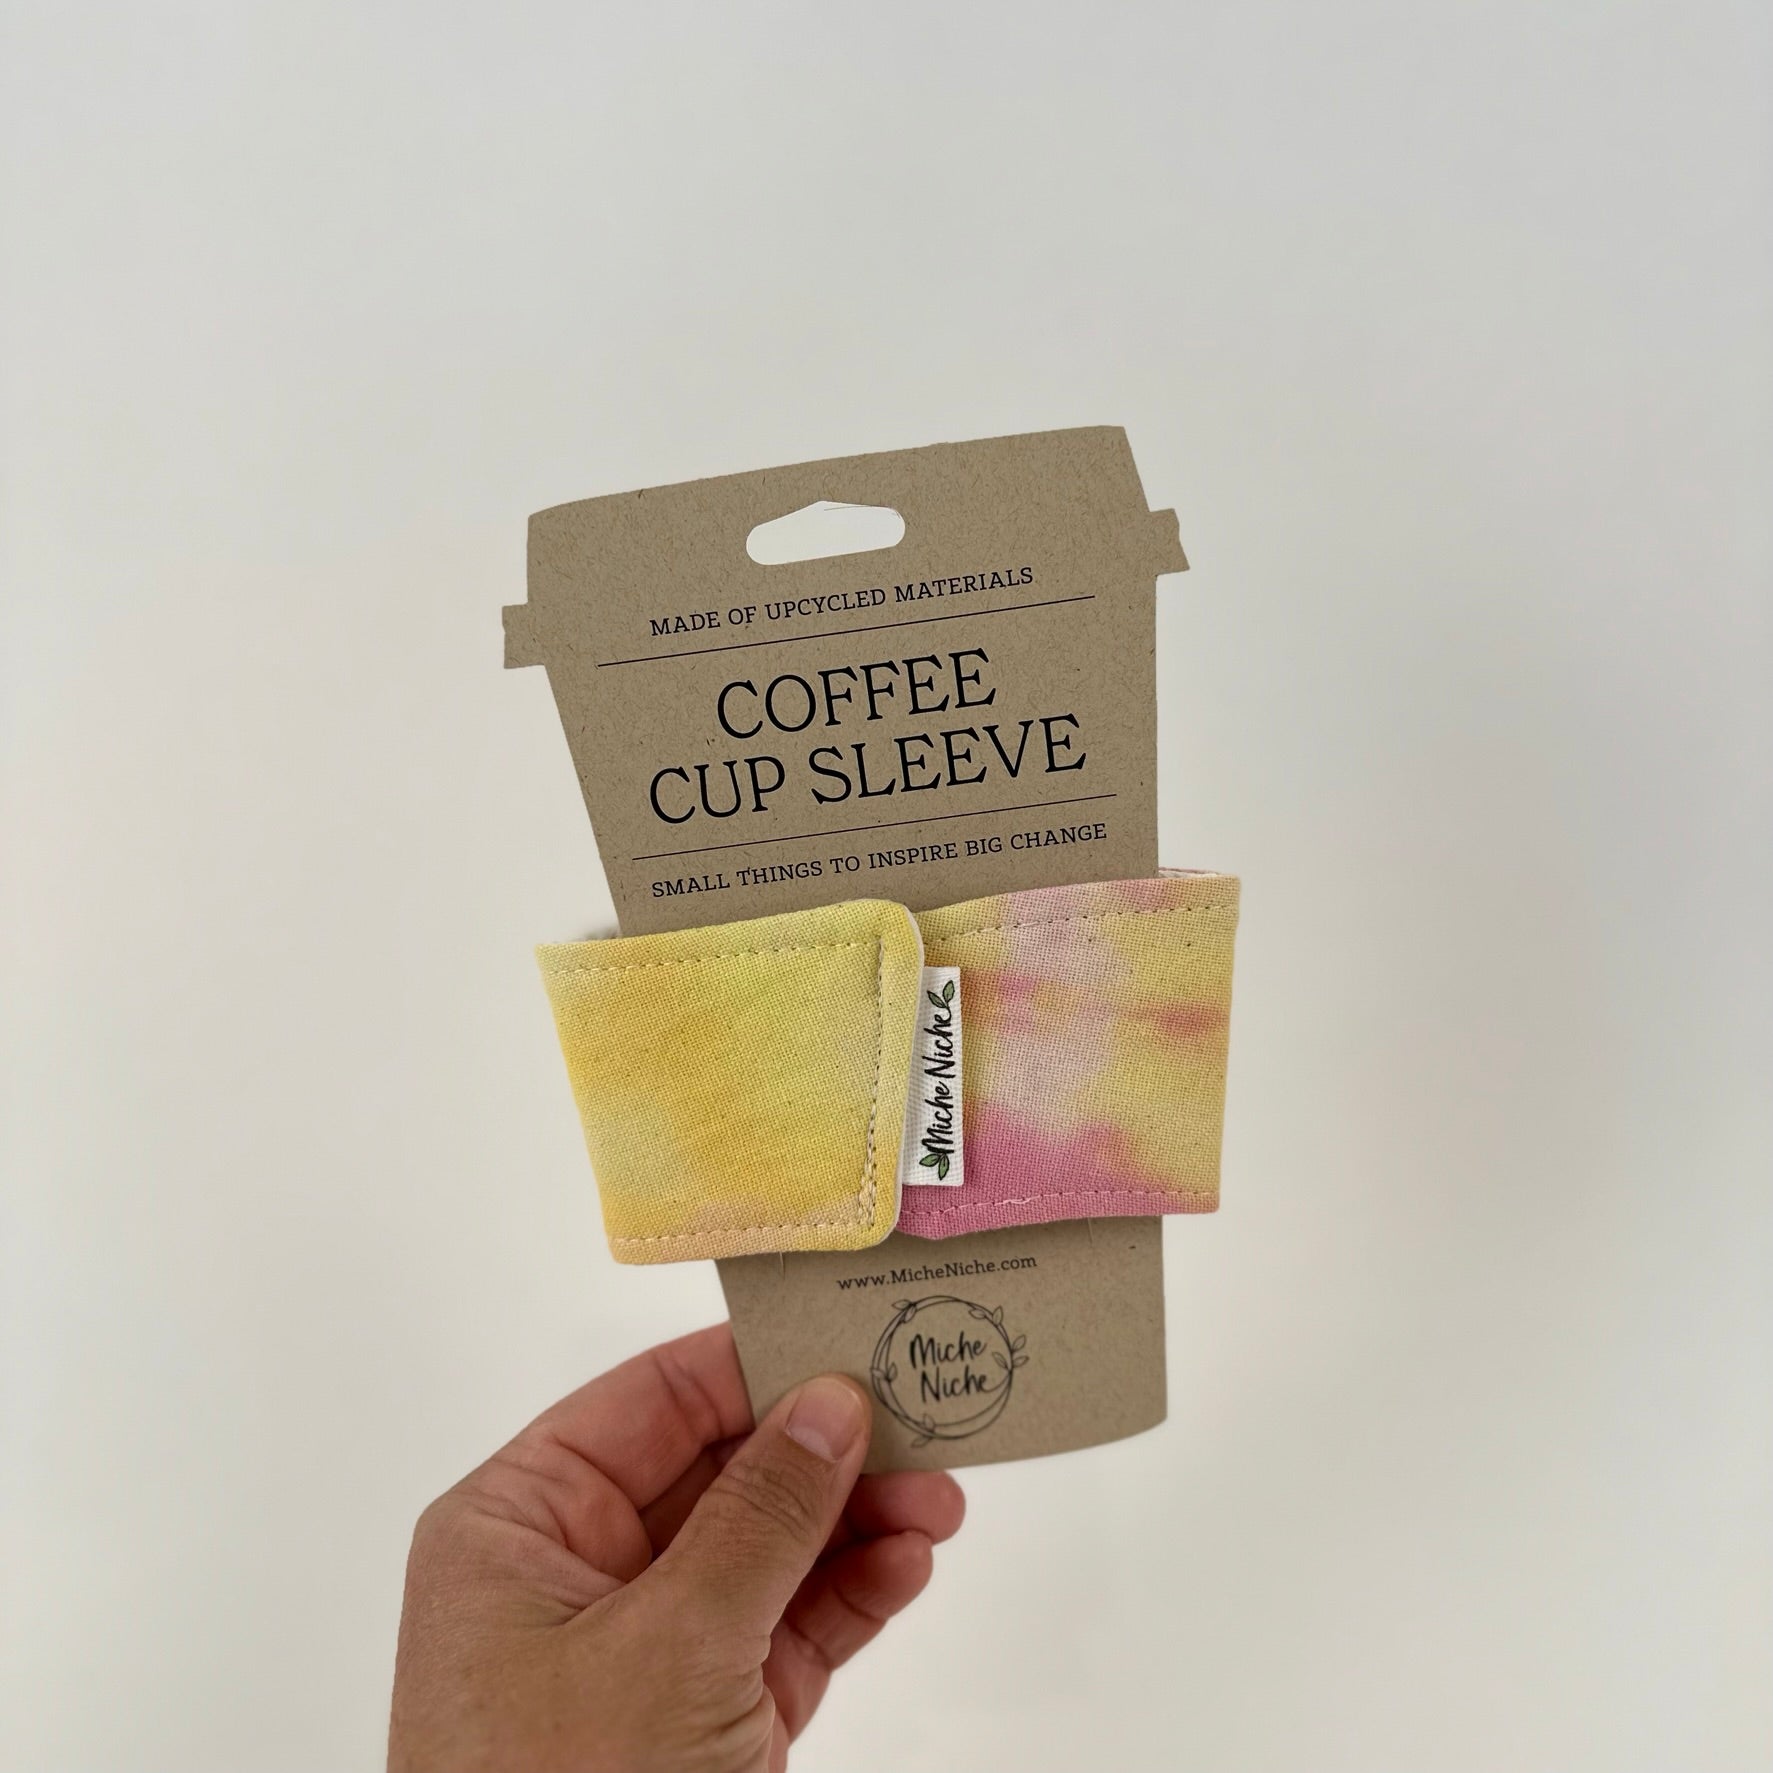 Miche Niche coffee cup sleeve in a hand dyed pink and yellow tie dye pattern